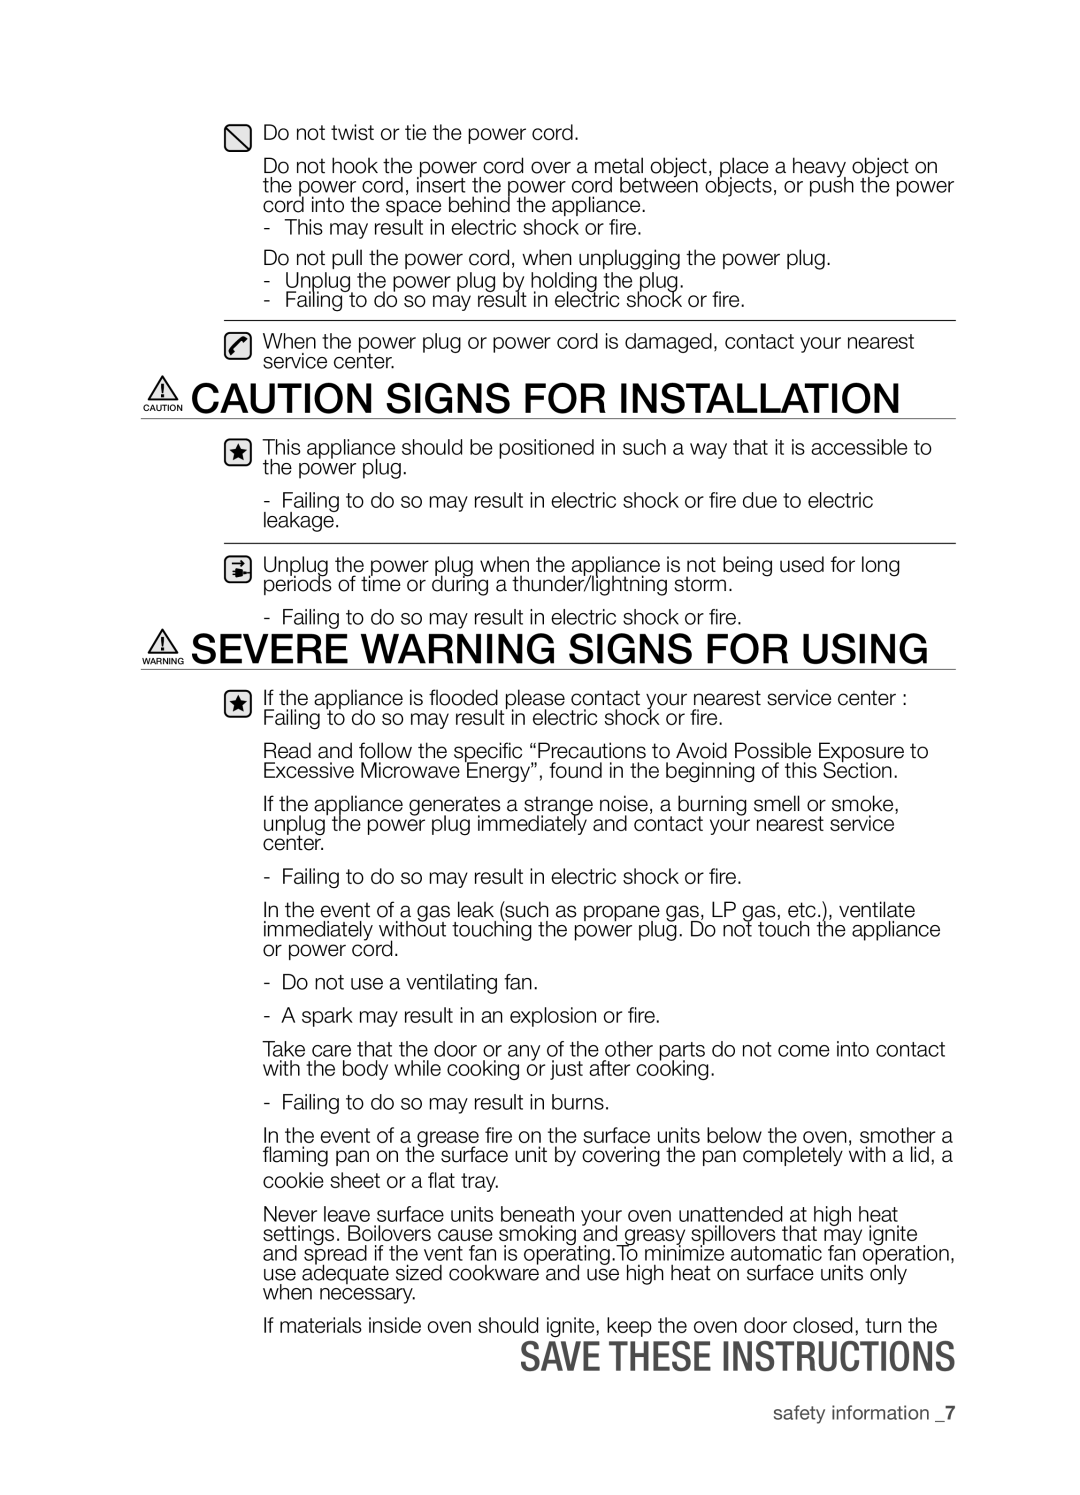 Samsung SMH9207ST Caution Caution Signs For Installation, Warning Severe Warning Signs For Using, Save these instructions 